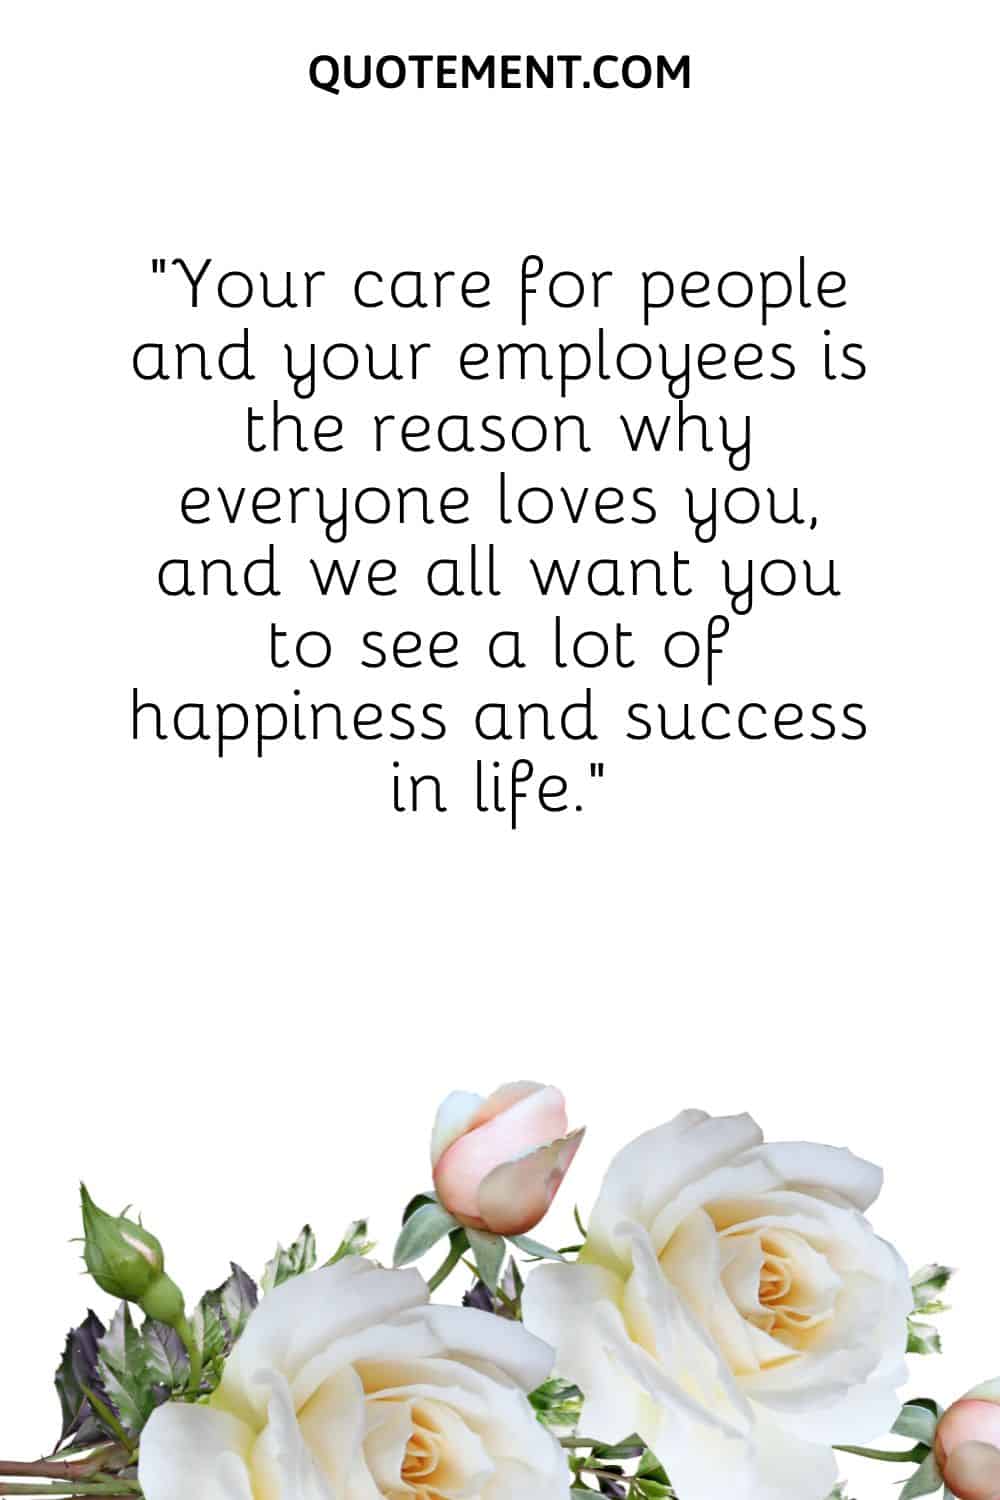 “Your care for people and your employees is the reason why everyone loves you, and we all want you to see a lot of happiness and success in life.”